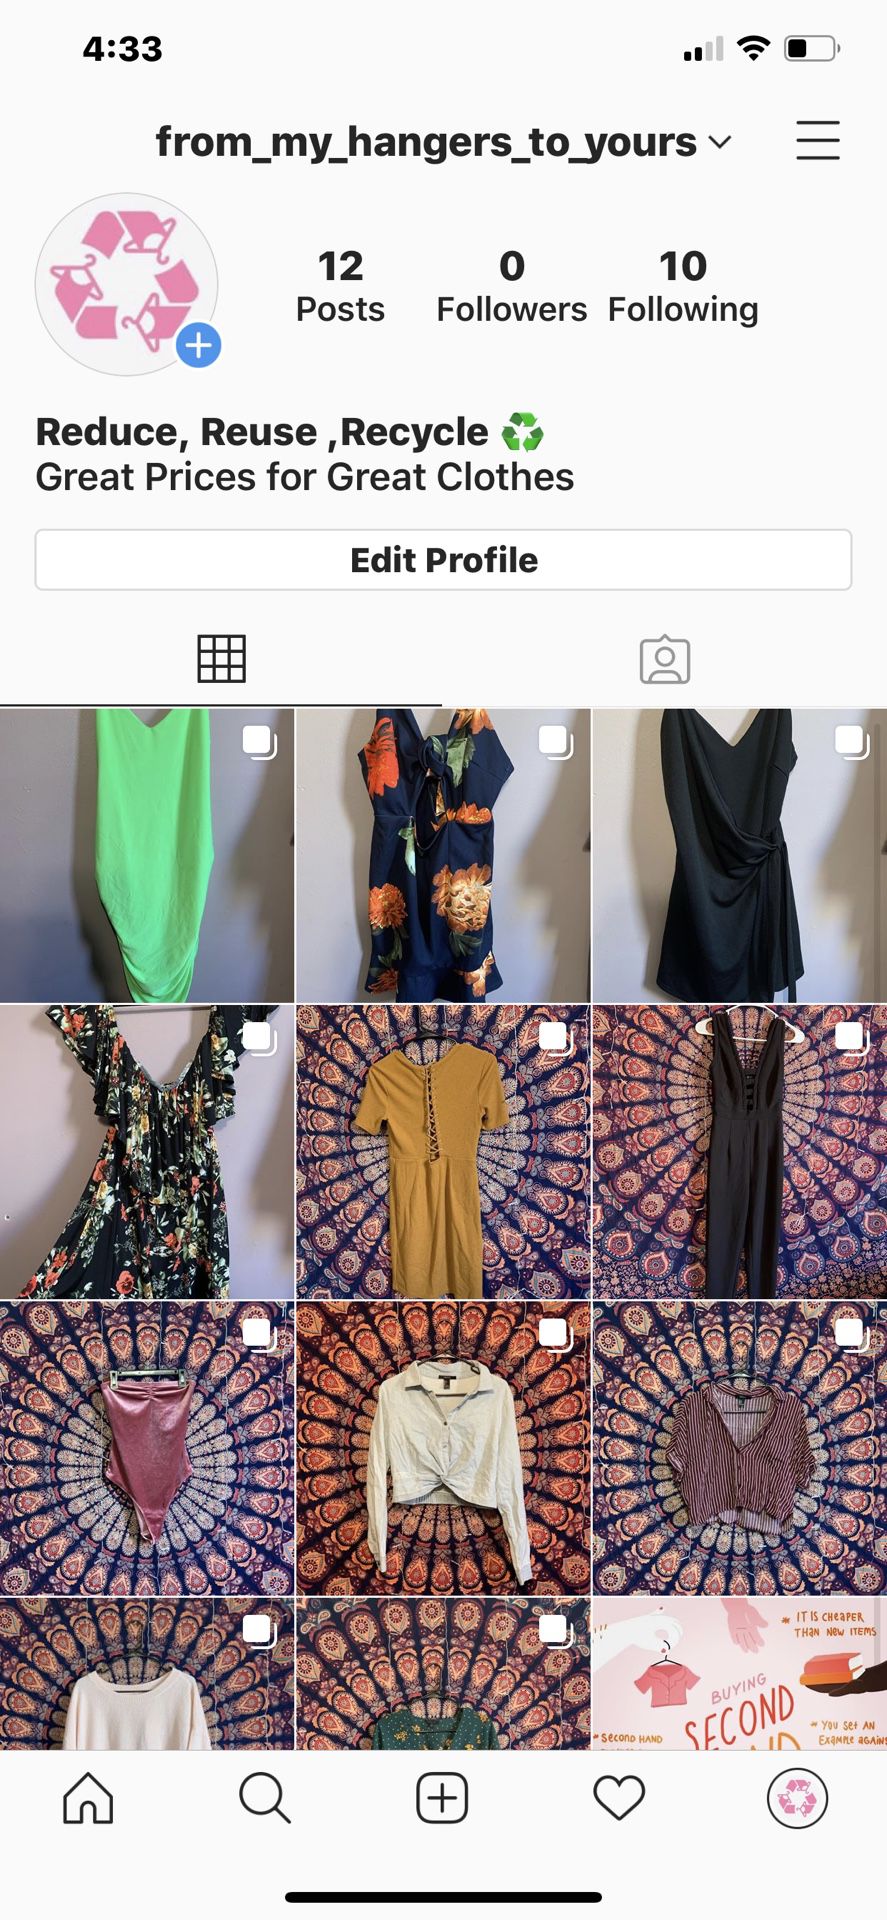 Follow my Instagram for women’s secondhand clothing